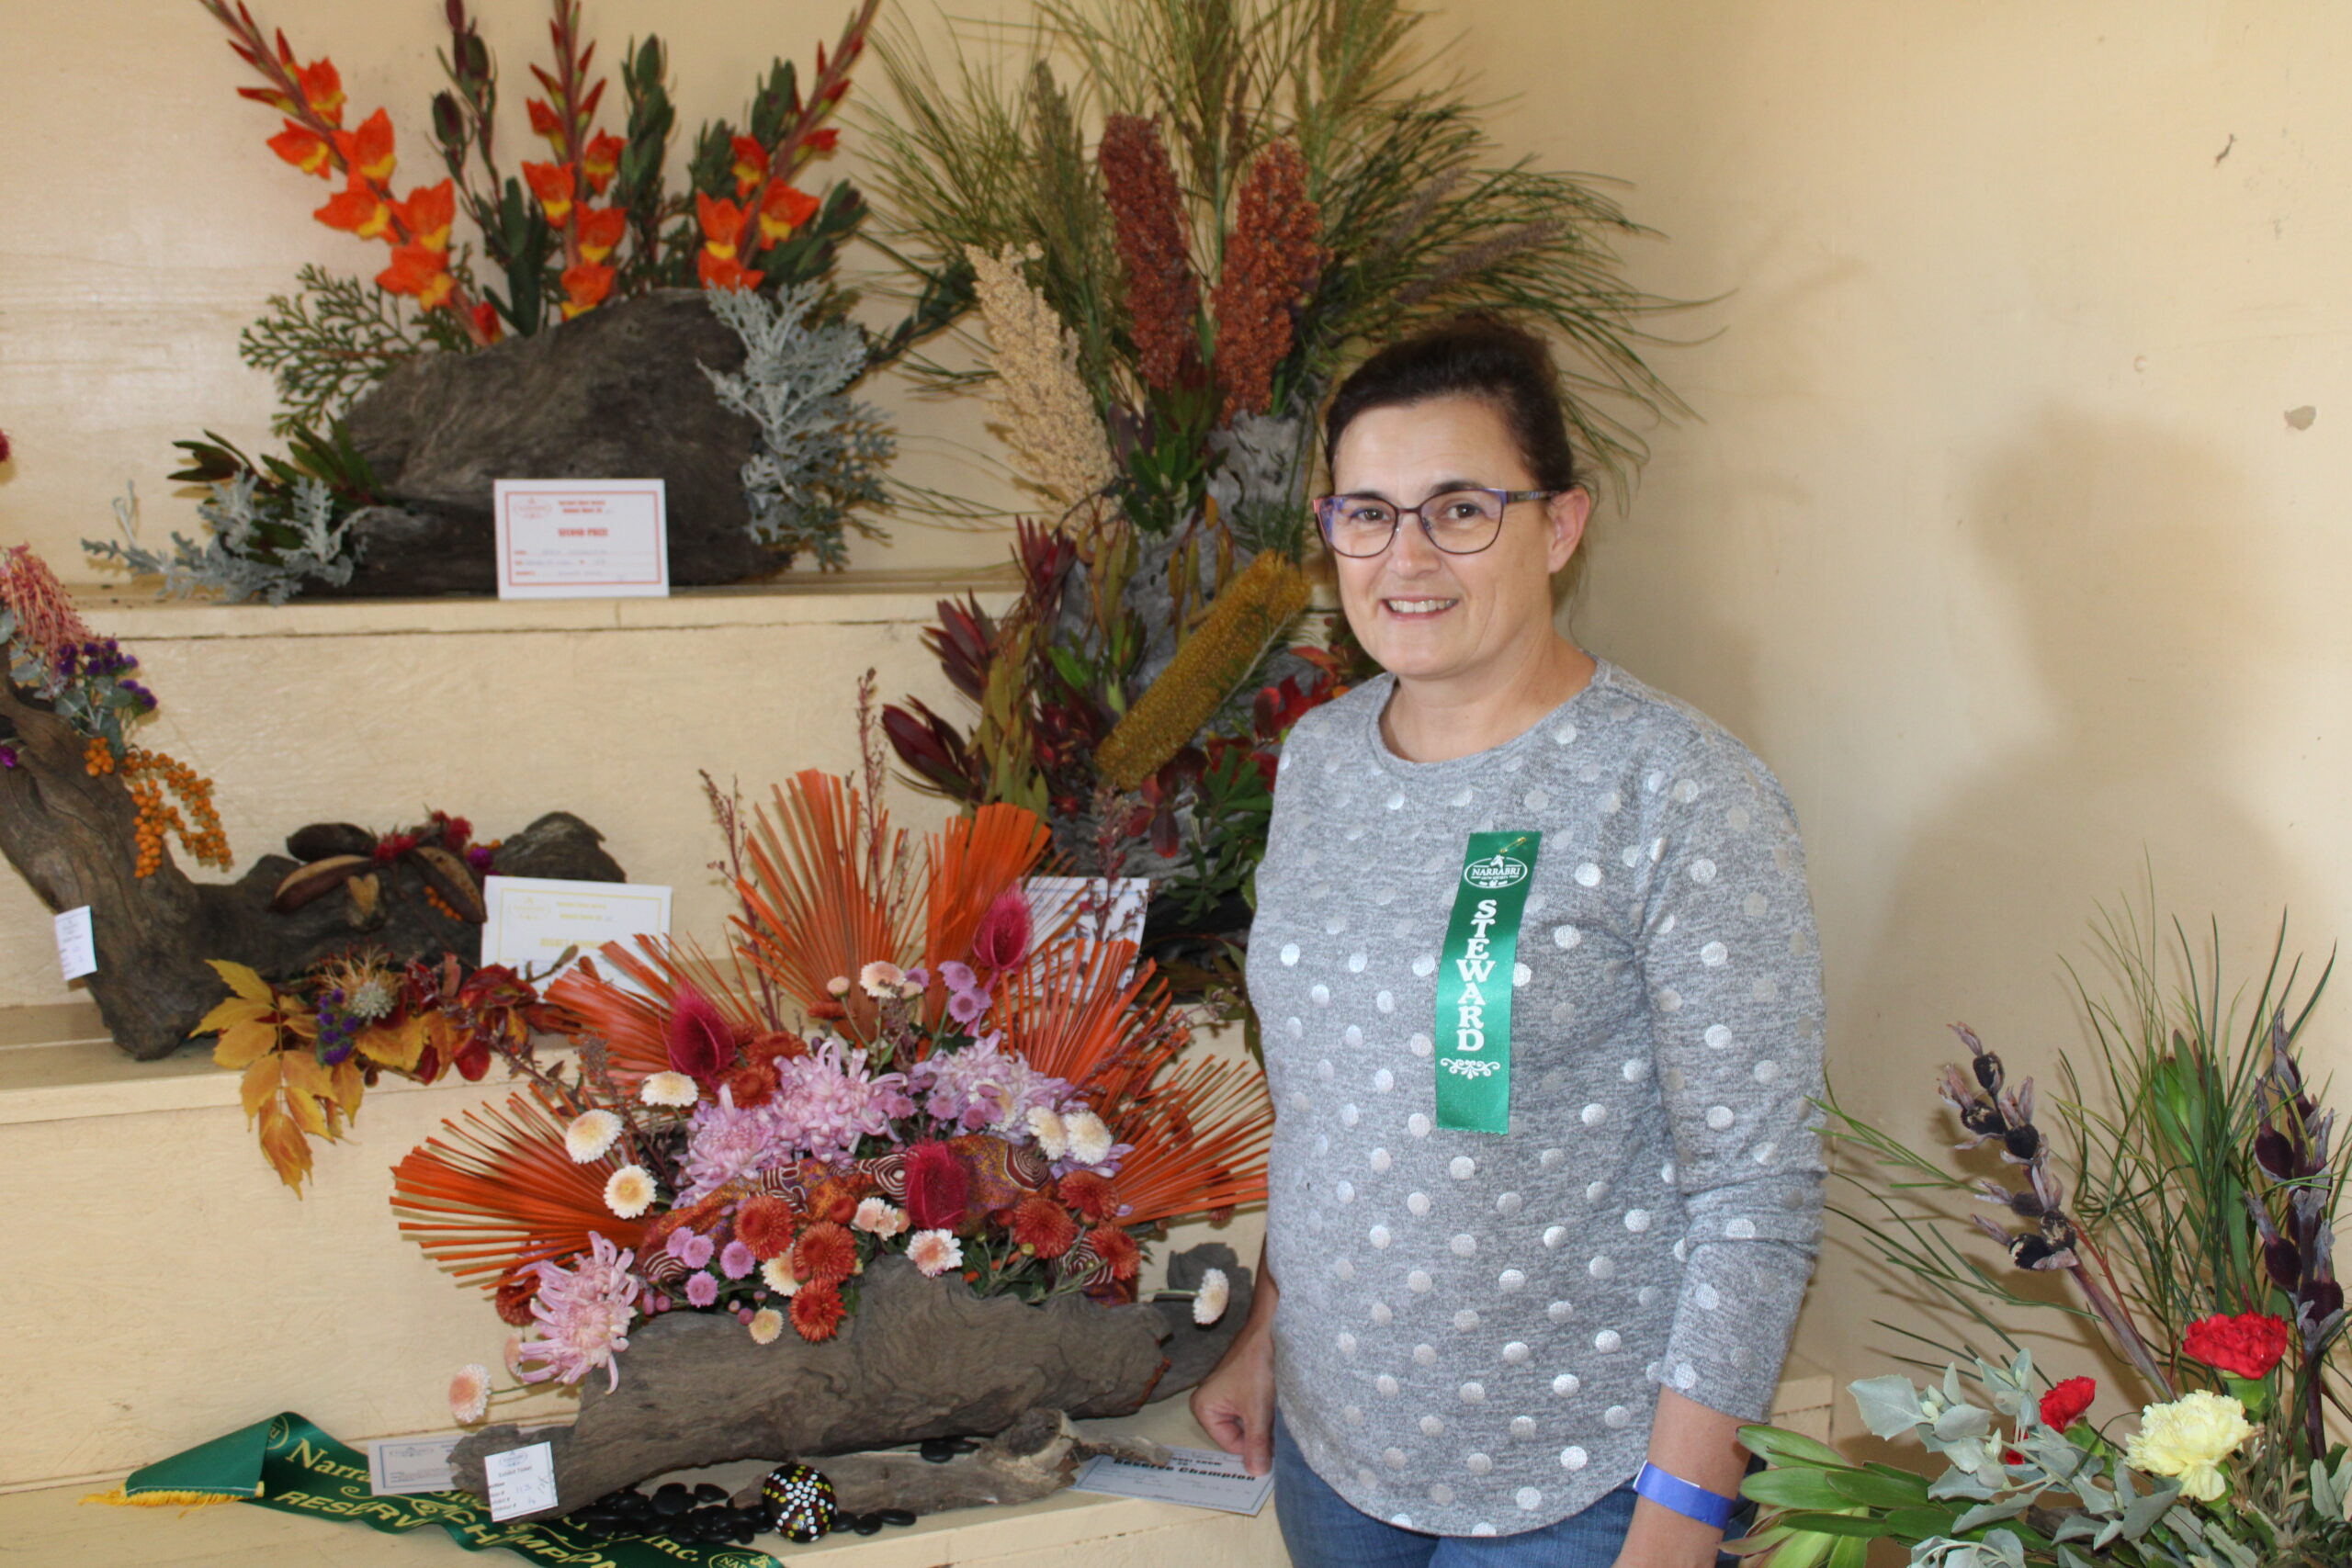 Kylie Finlay was awarded reserve champion for this arrangement she entered into the horticultural pavilion.